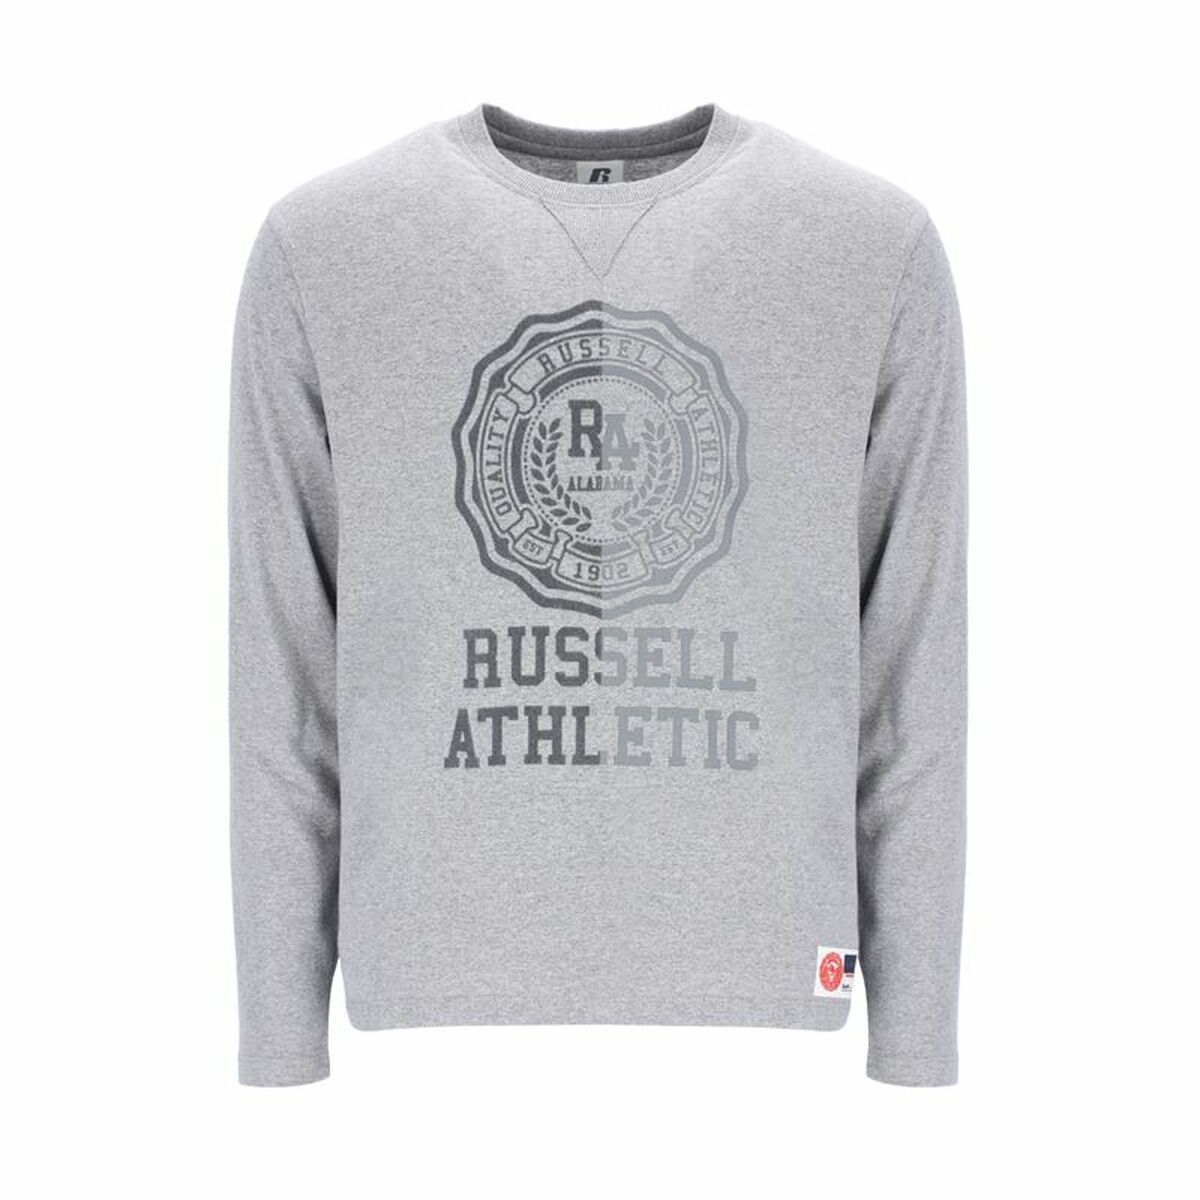 T-shirt à manches longues homme Russell Athletic Collegiate Gris clair